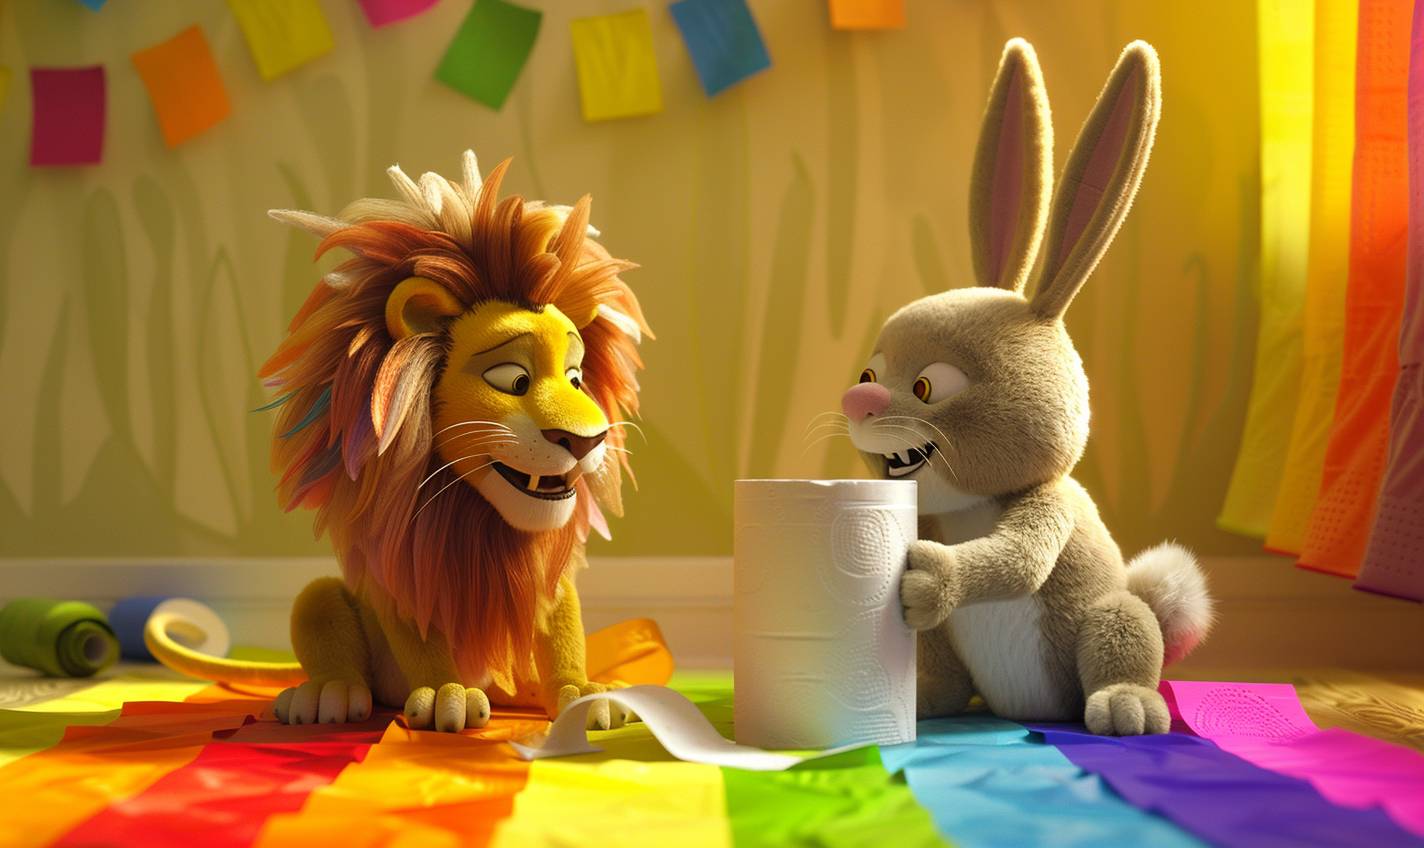 The lion and the bunny plushies are playfully messing around with rainbow colored toilet paper!